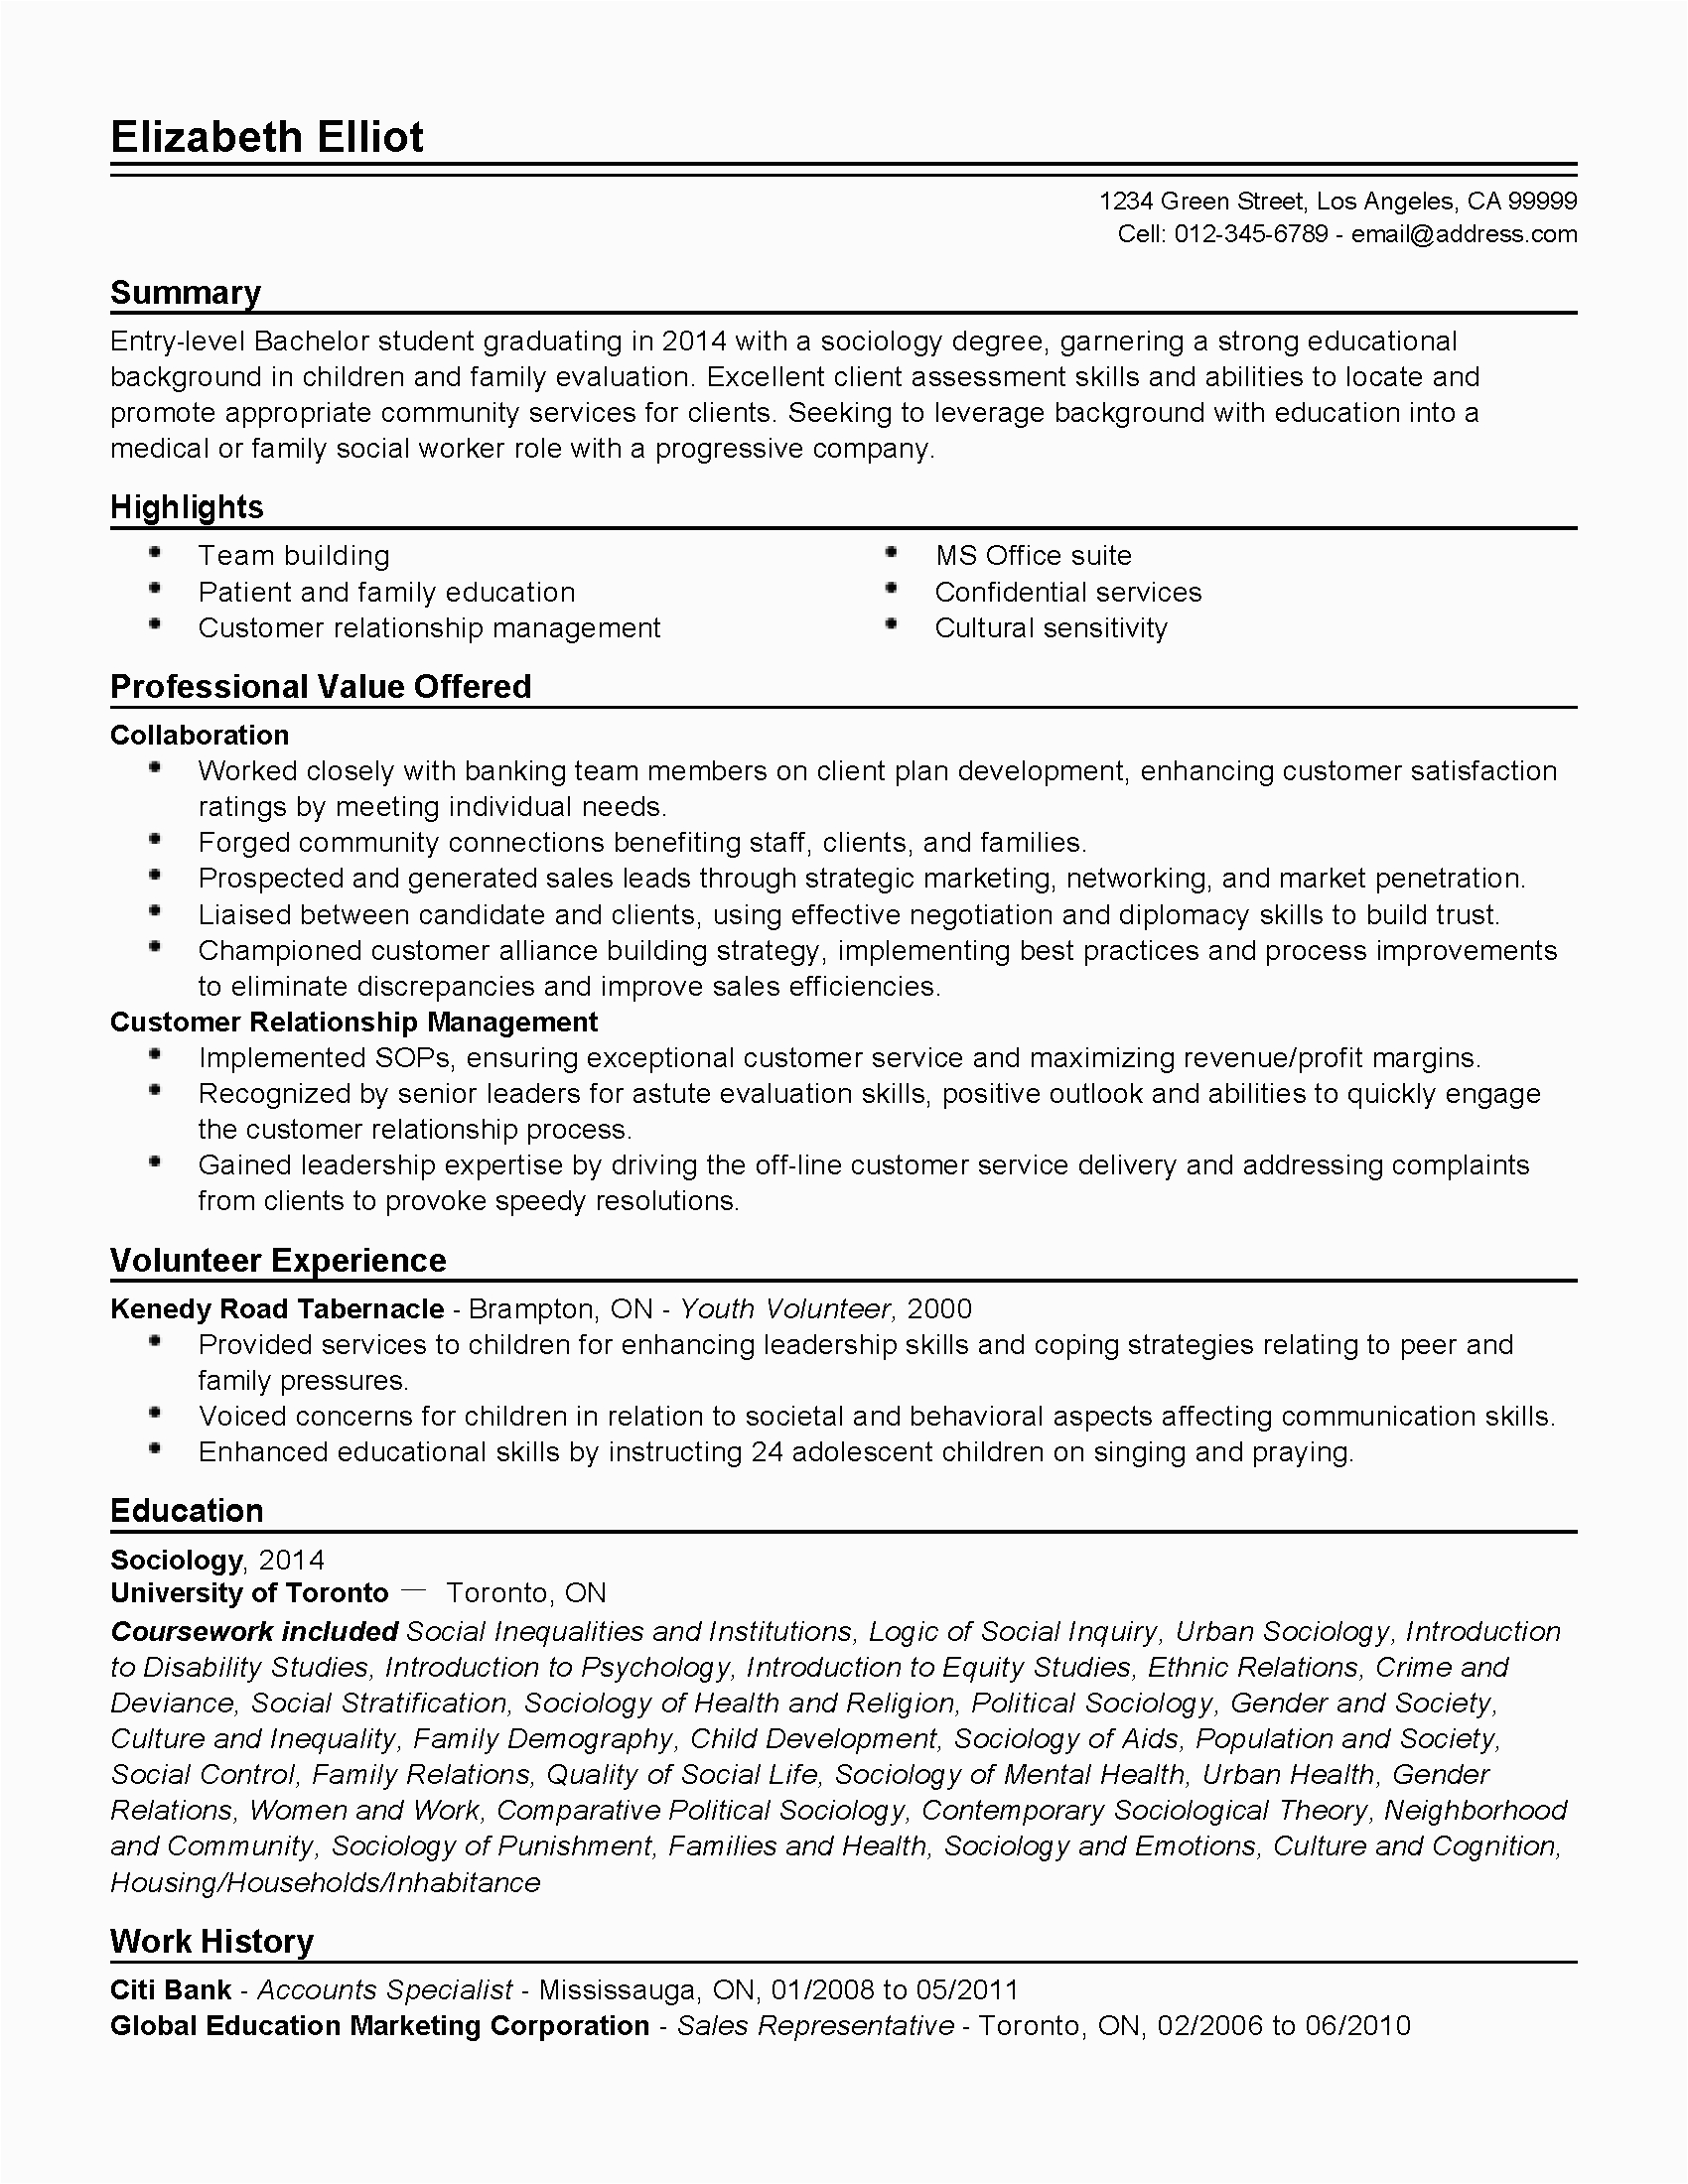 Resume Samples for social Service Positions Professional Entry Level social Worker Templates to Showcase Your